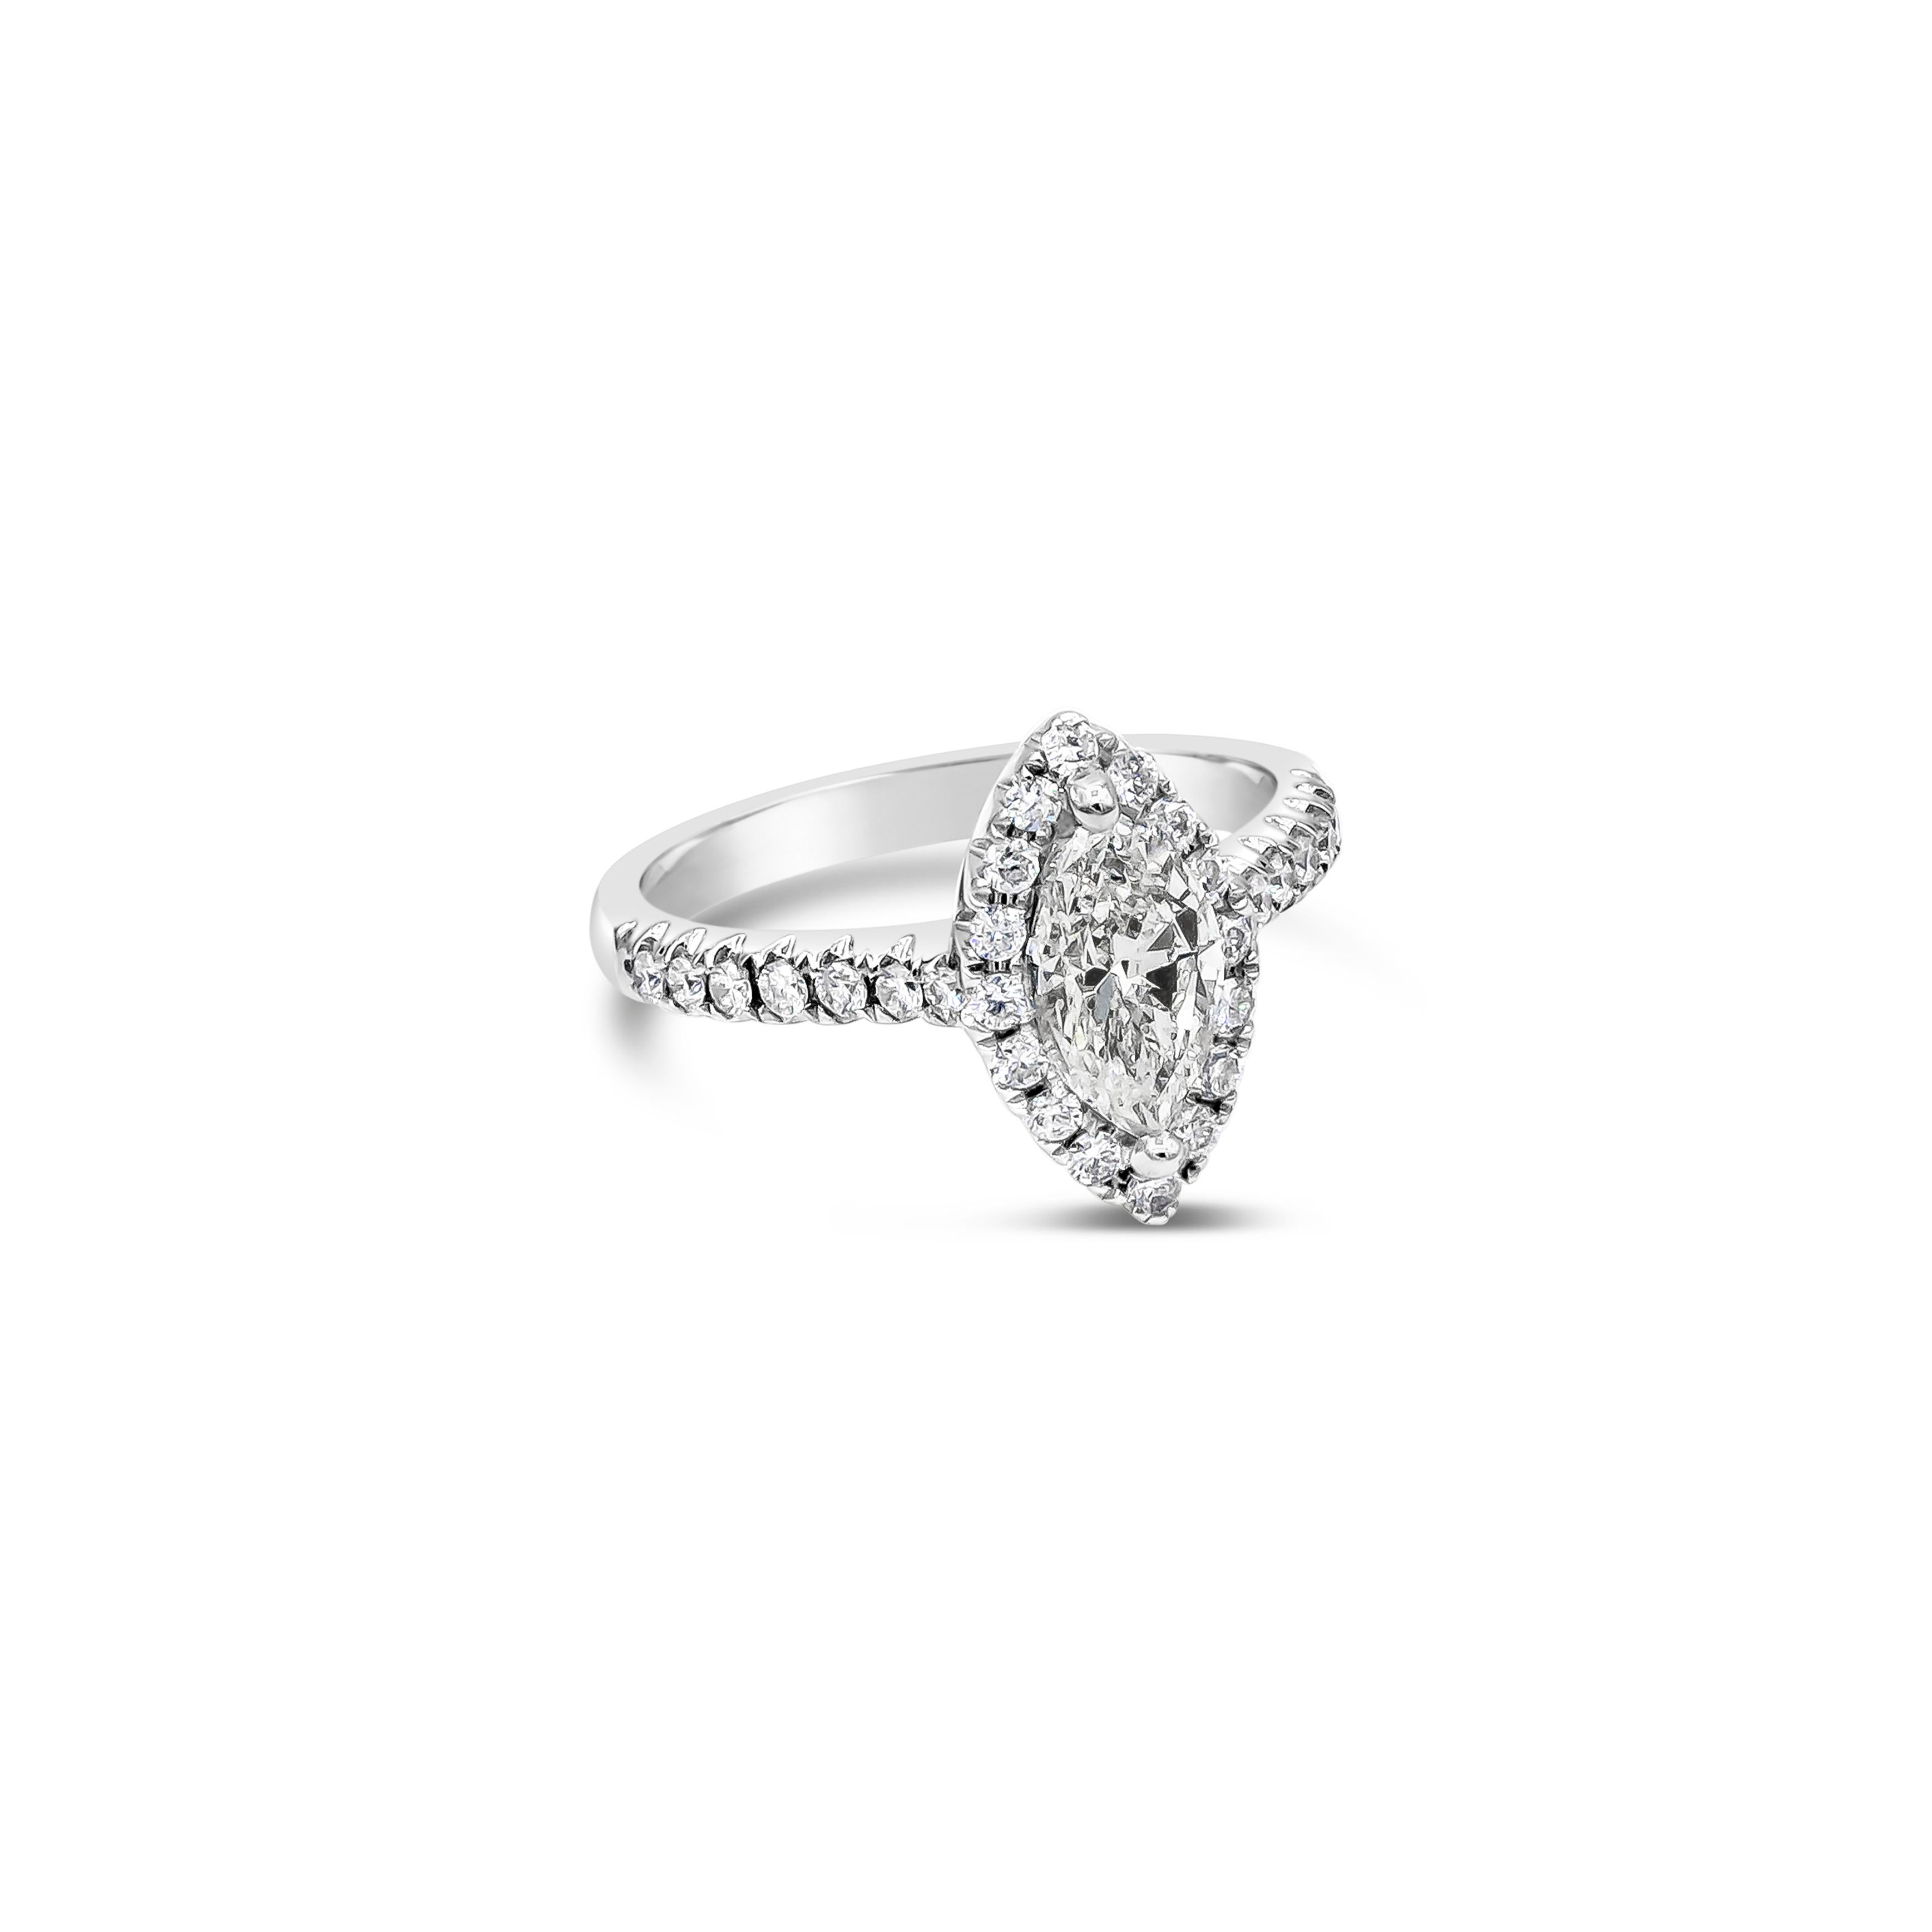 Showcasing a 1.00 carats marquise cut diamond, EGL certified as F color and VS2 in clarity. Surrounded by a single row of round brilliant diamonds in halo setting. Set in a thin diamond encrusted shank half eternity setting, made in 18K white gold.